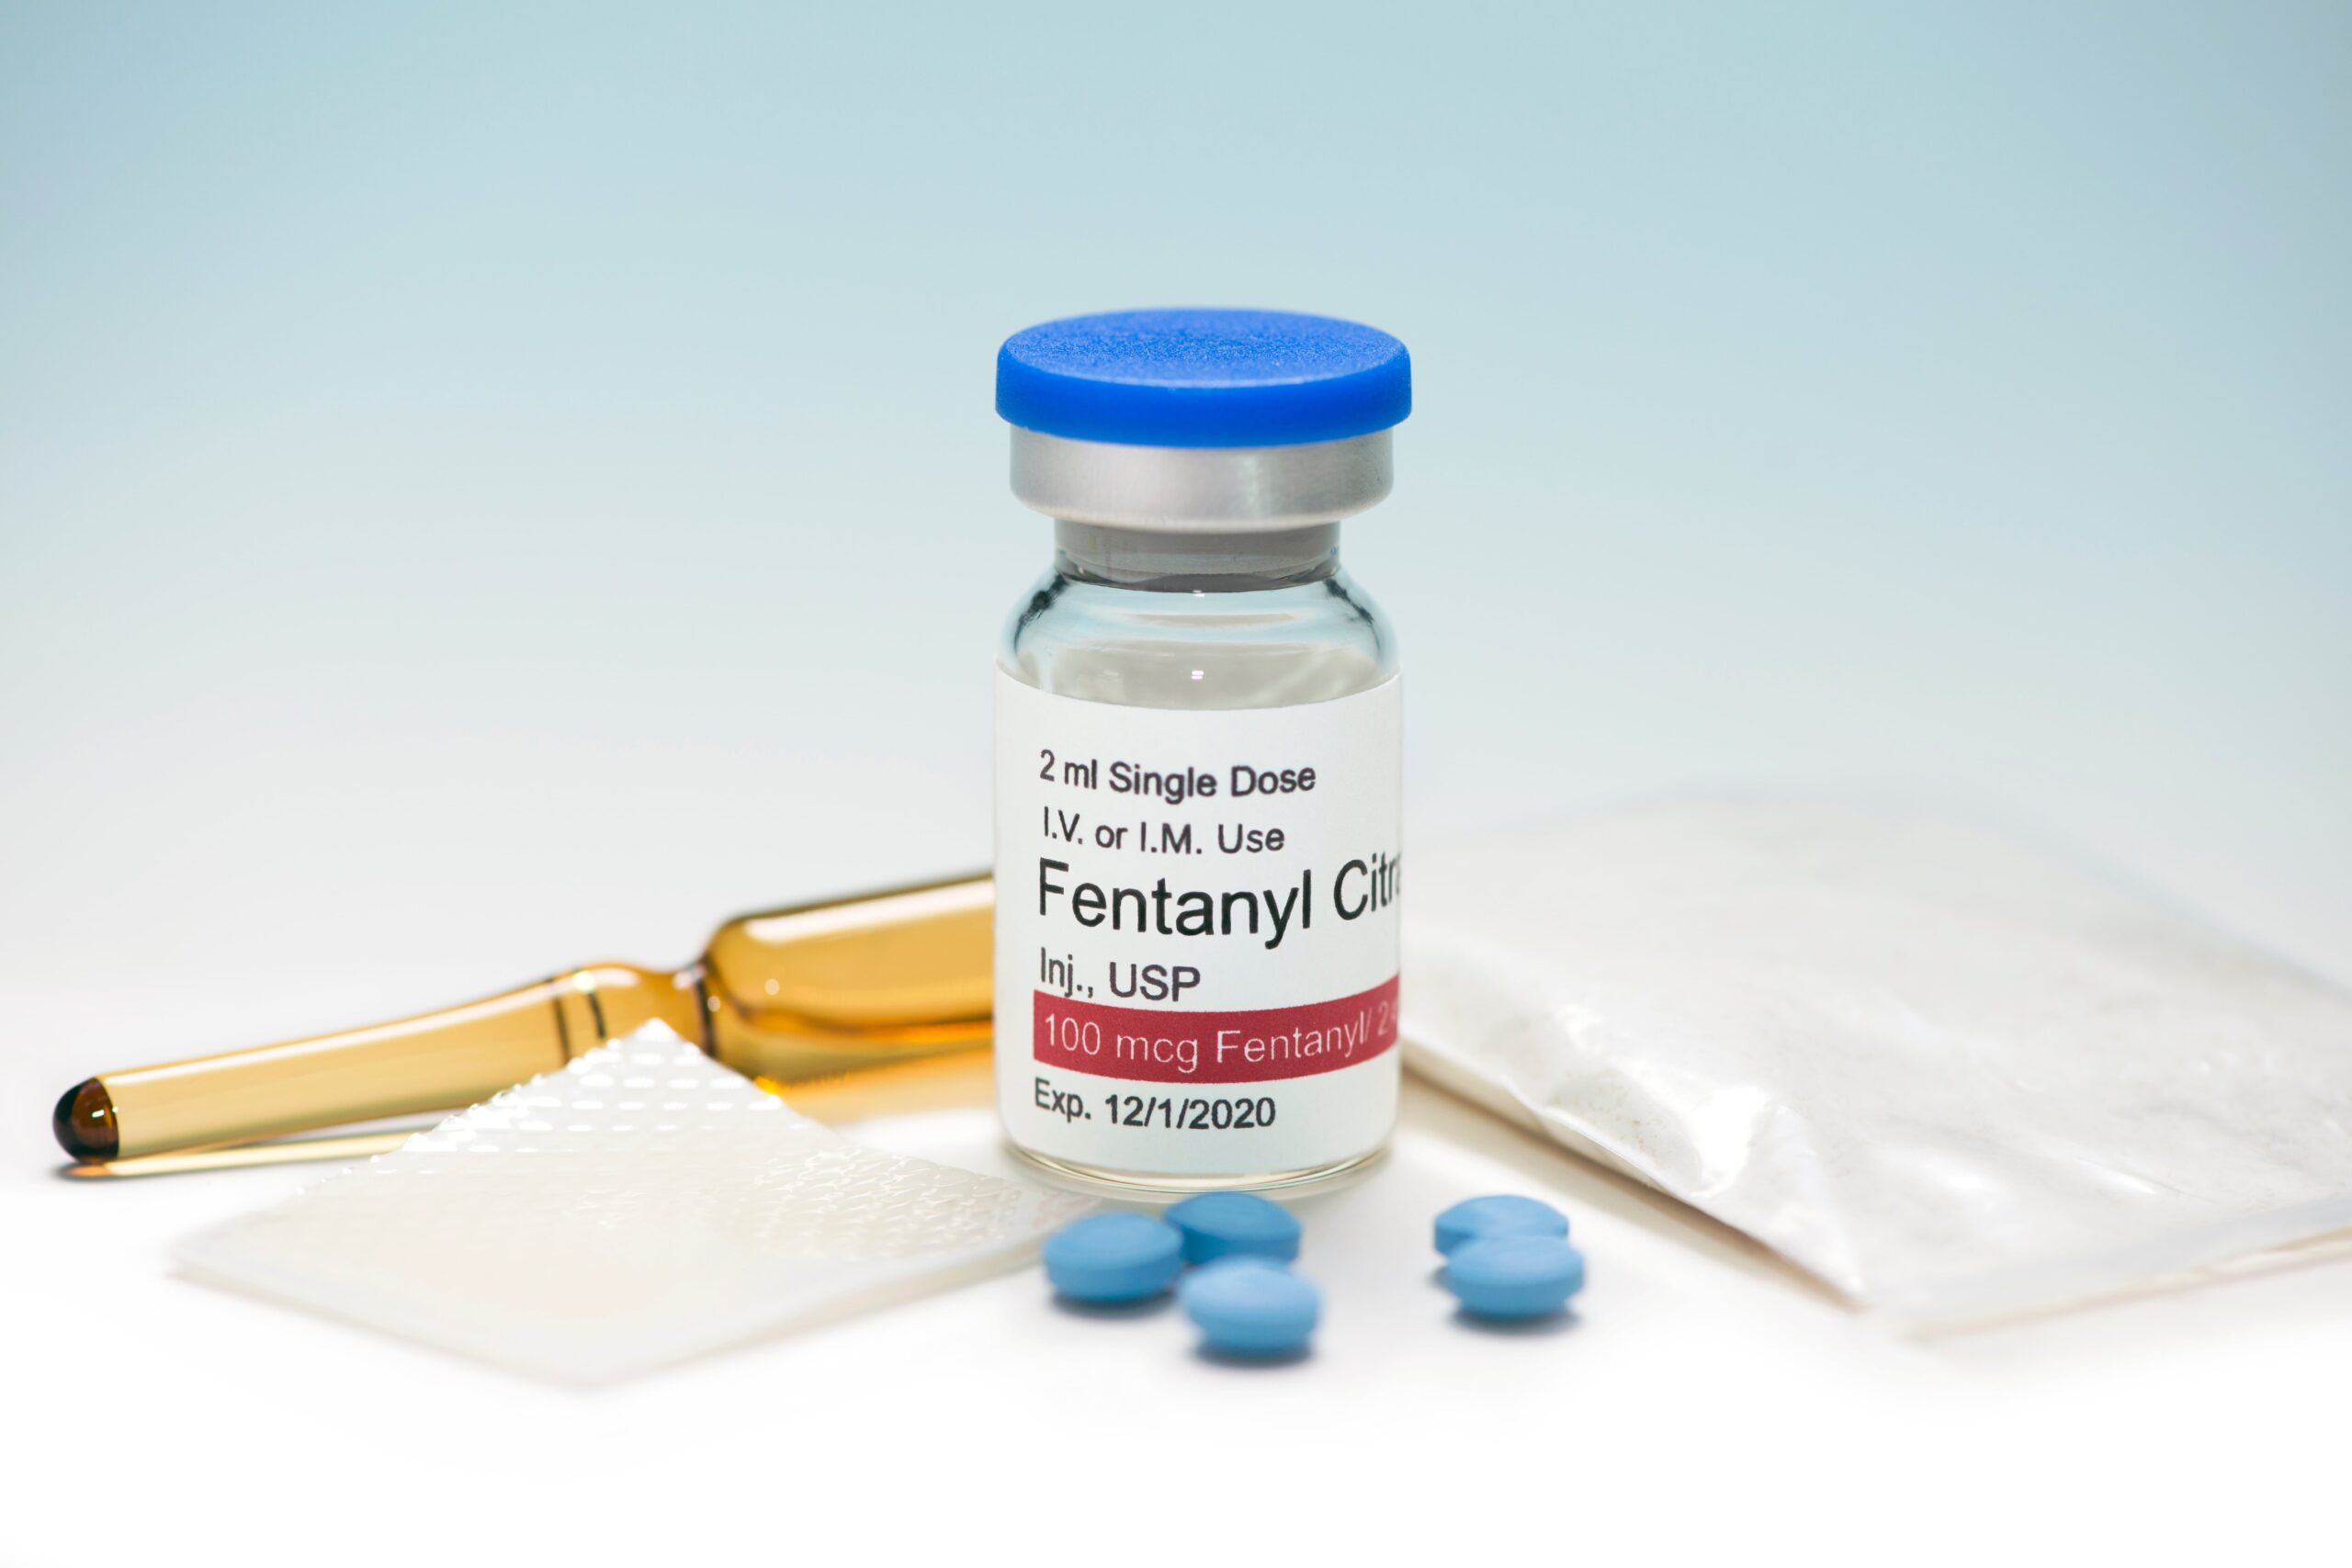 How long does fentanyl stay in your system?